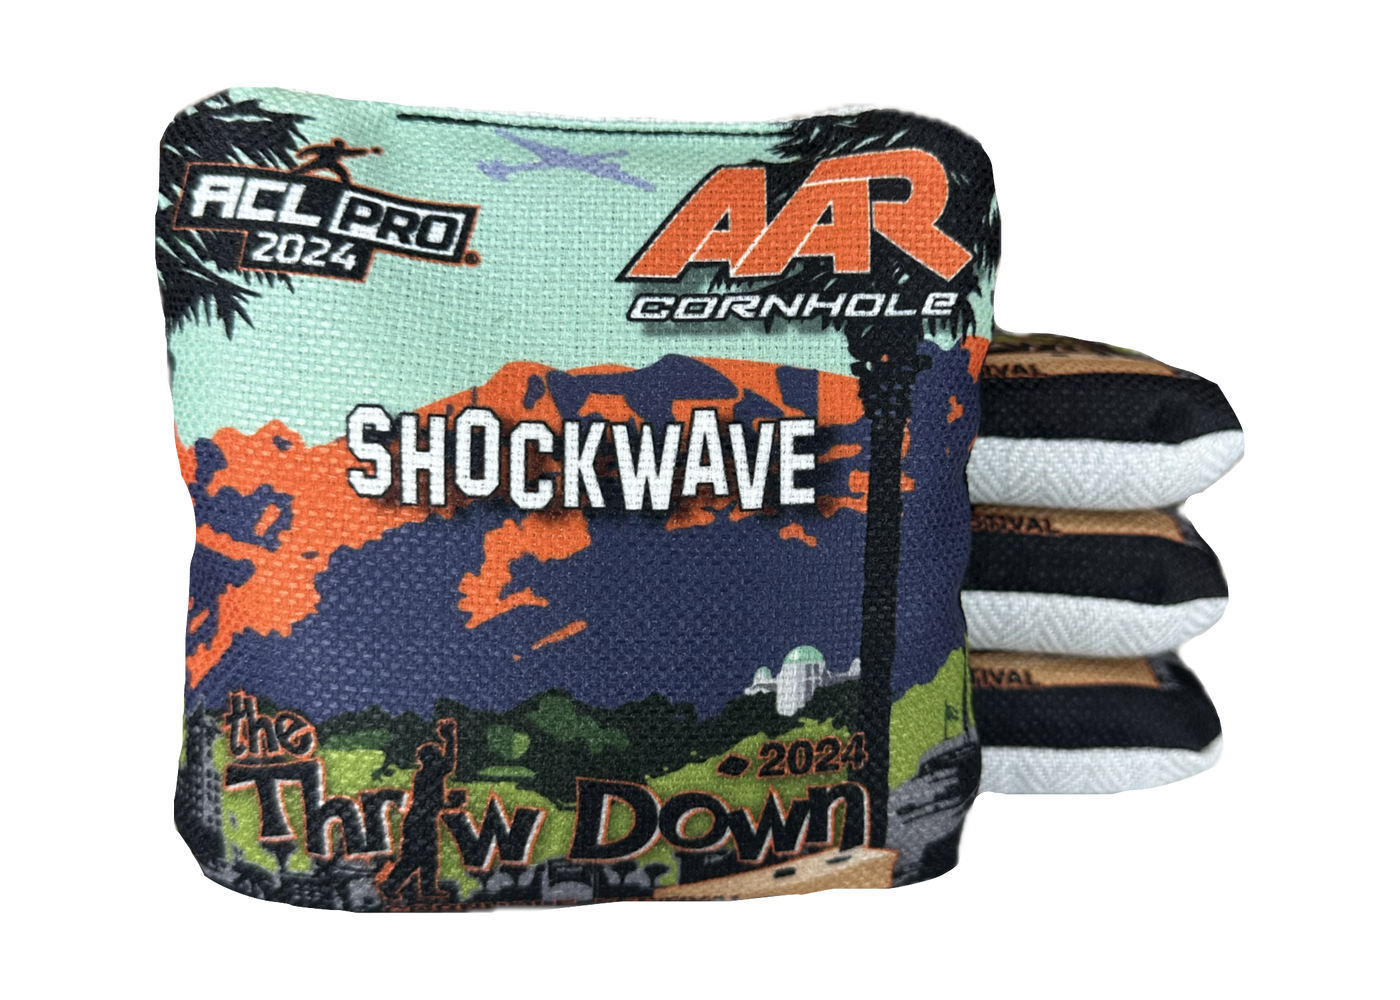 2024 Throw Down Cornhole Festival Official Tournament Bags - Multiple Series/Designs - ACL PRO STAMPED - SET OF 4